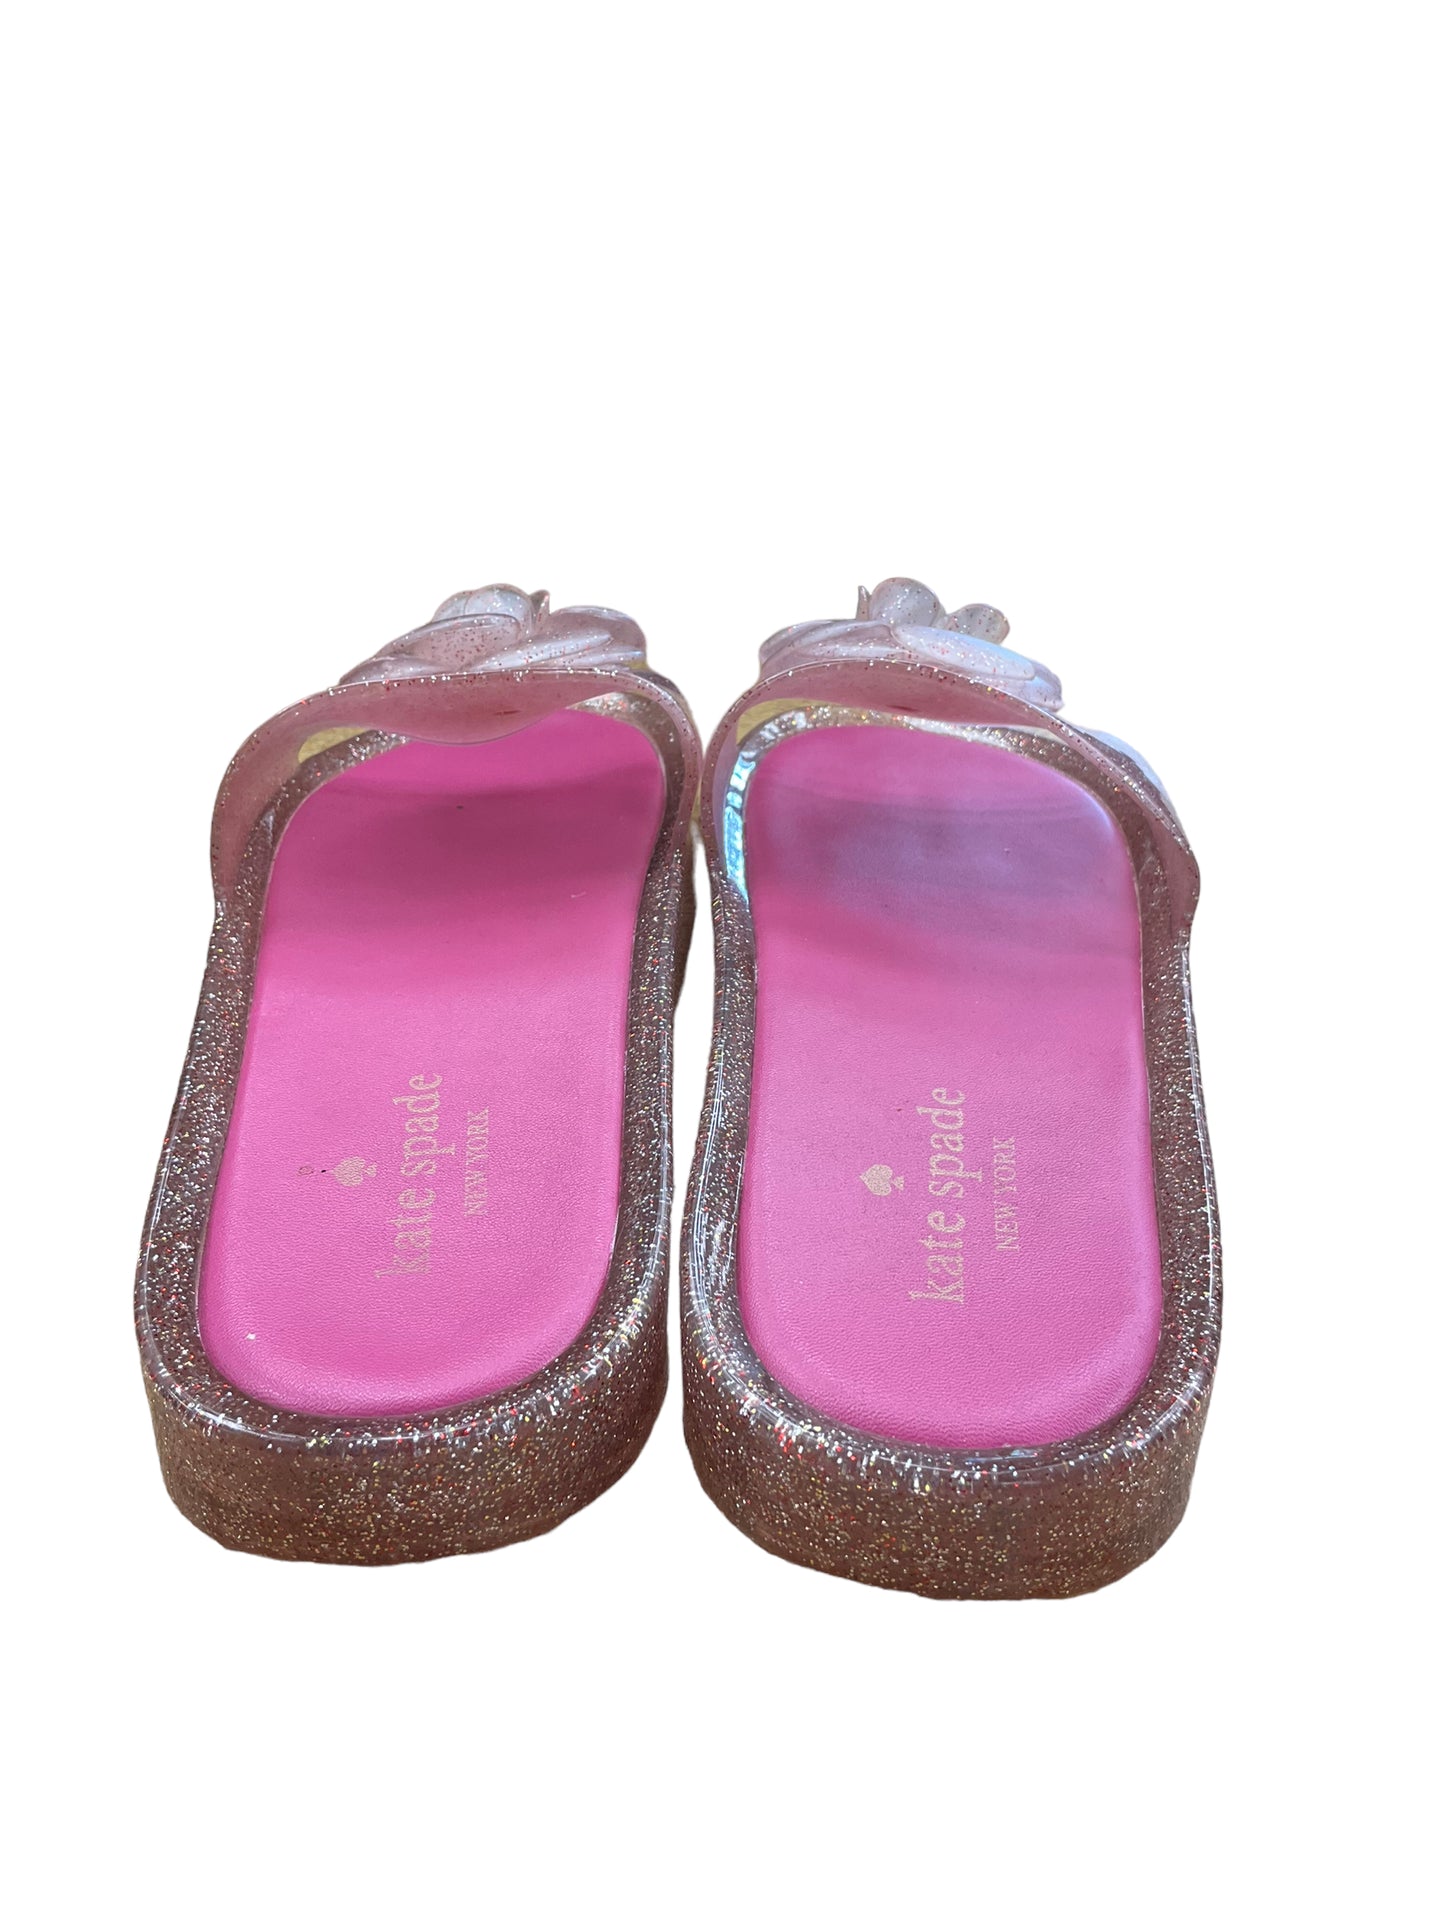 Sandals Flats By Kate Spade  Size: 7